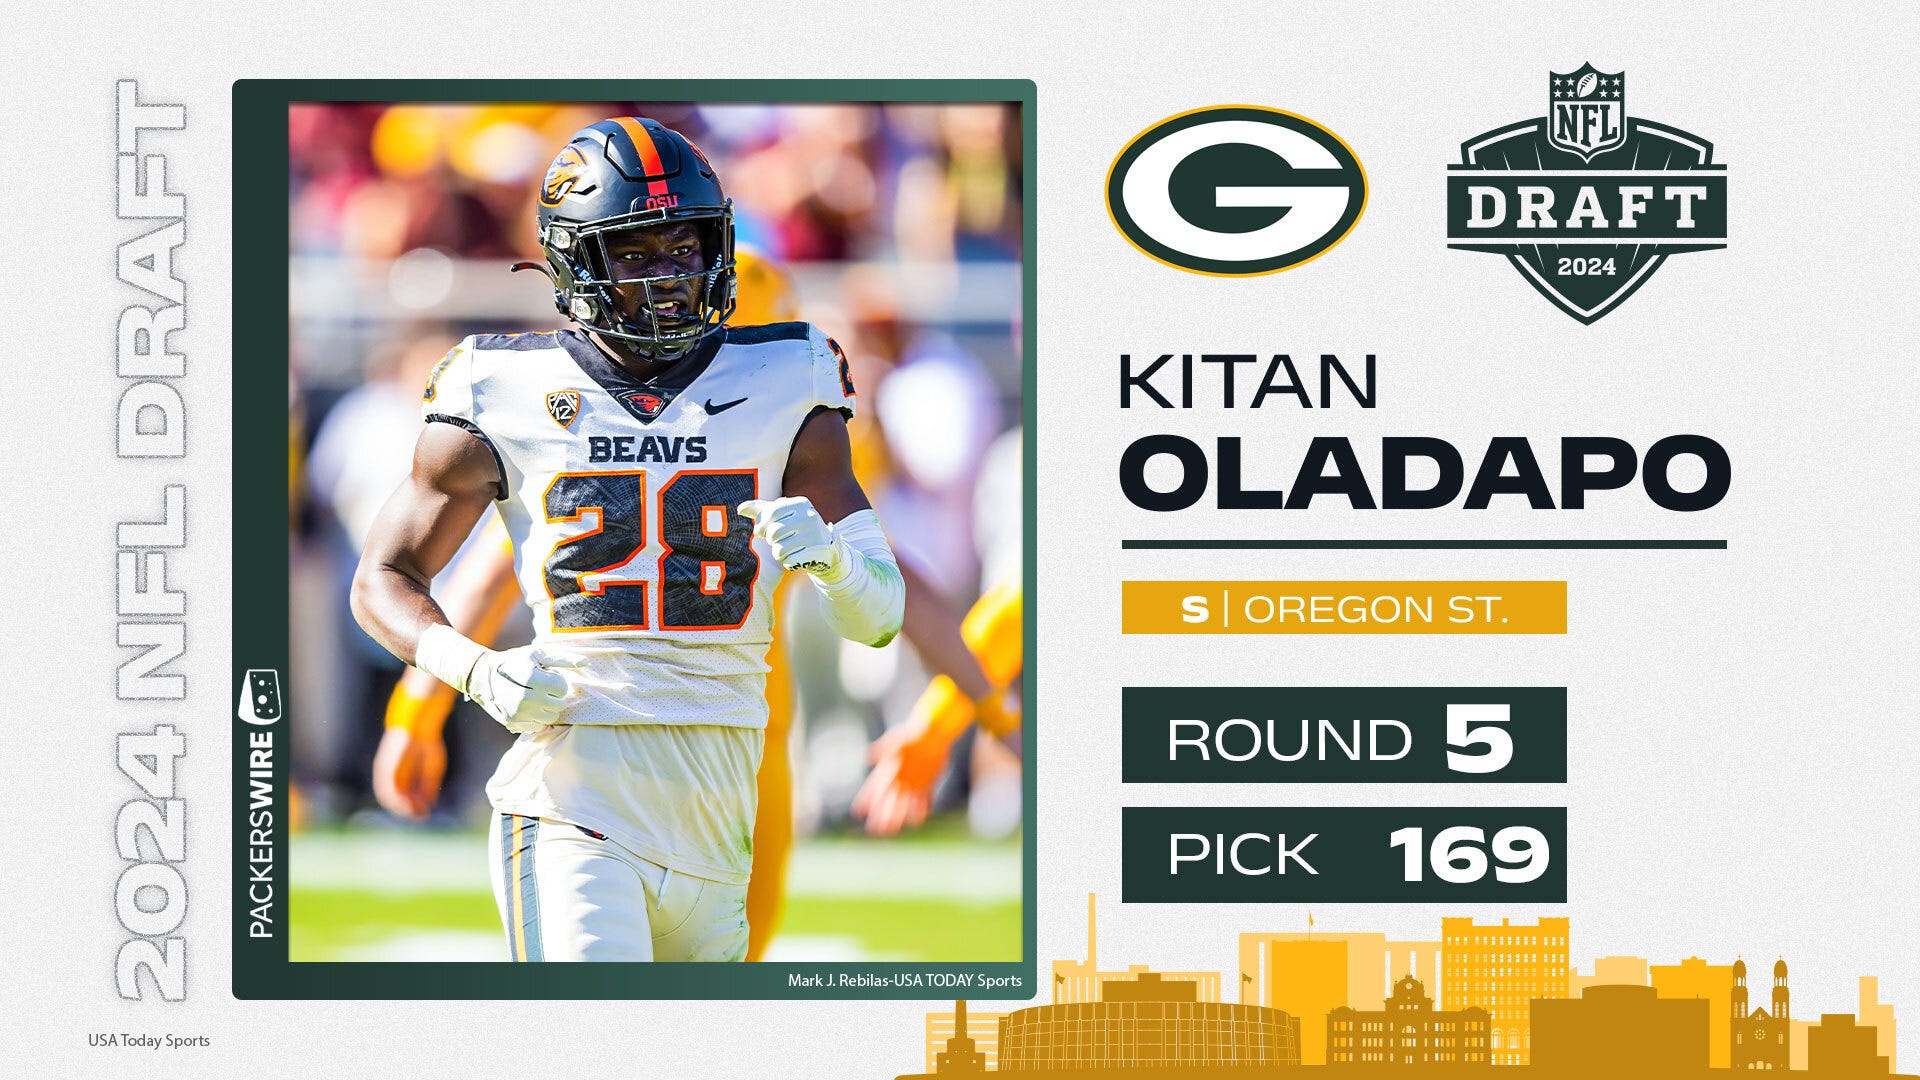 packers select oregon state s kitan oladapo at no. 169 overall in 2024 nfl draft